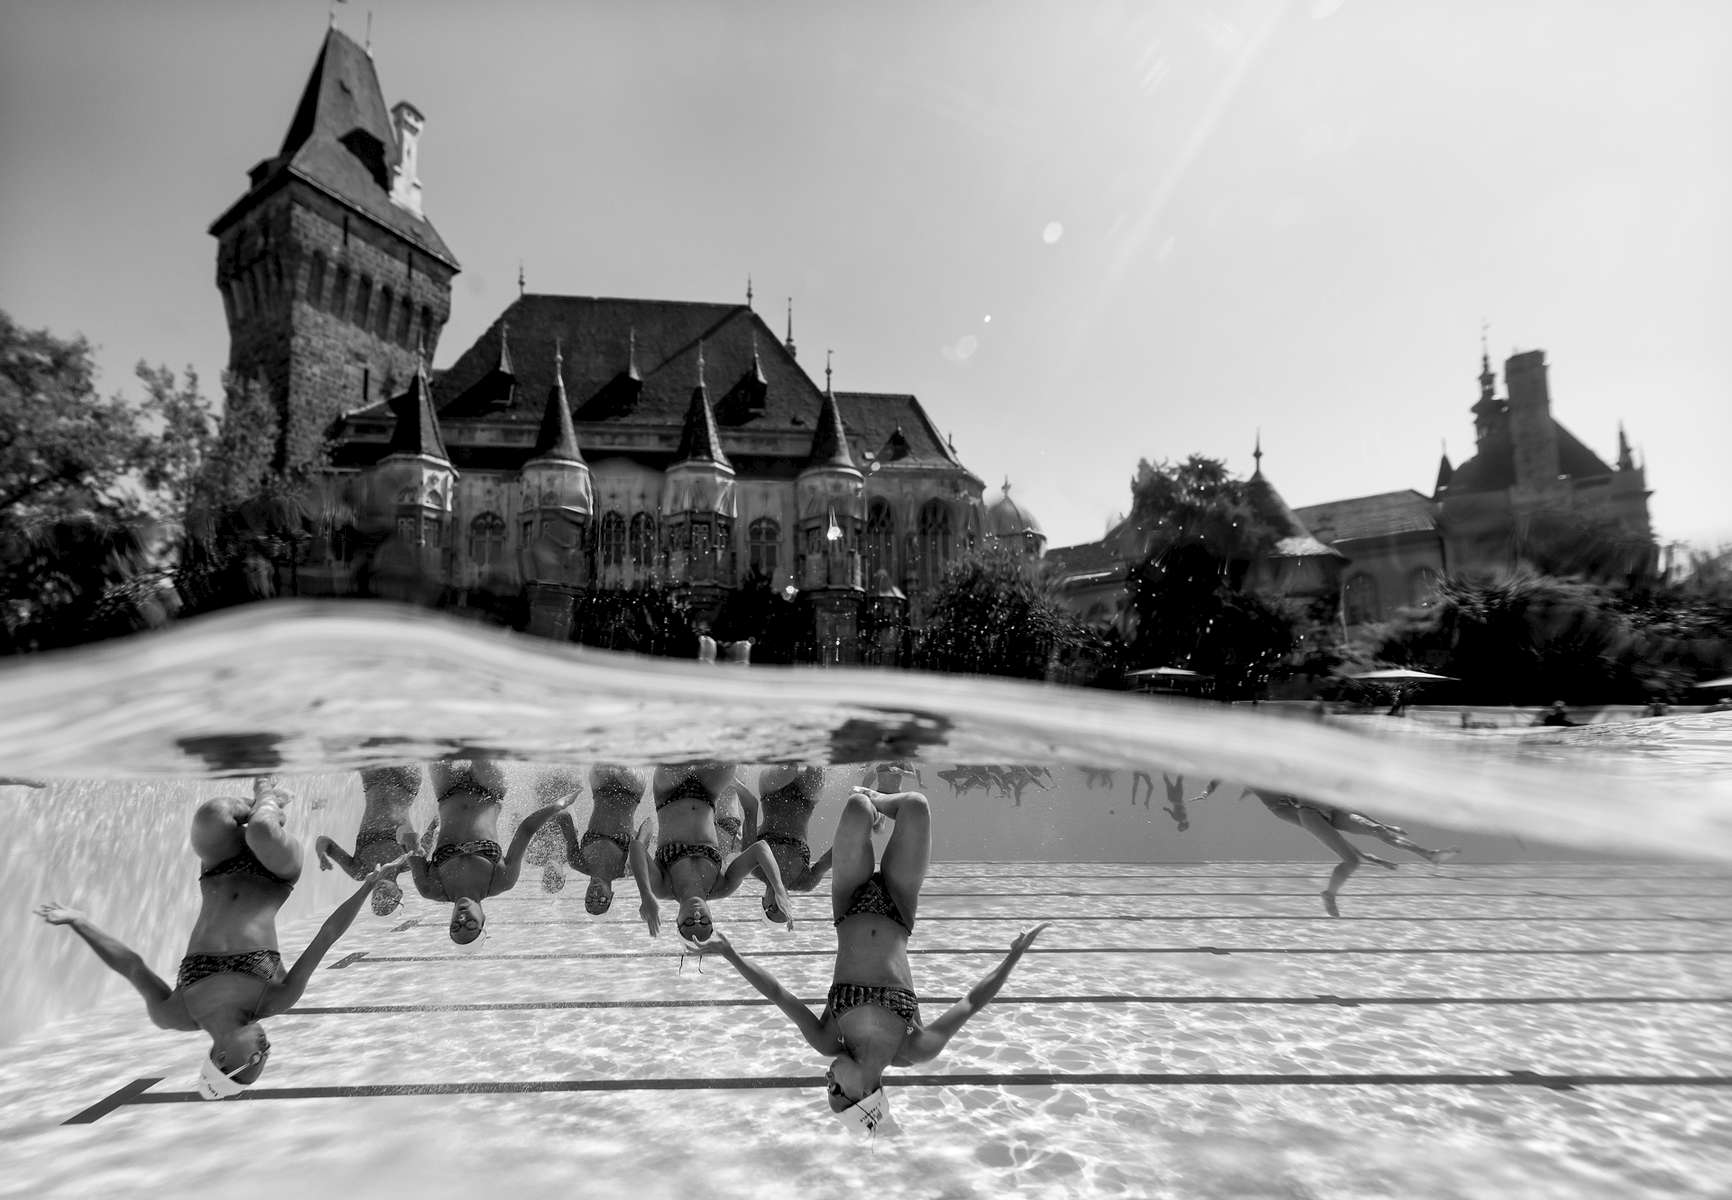 The Synchronised Swimming Team of France trains in front of the Vajdahunyad Castle during day 4 of the Budapest 2017 FINA World Championships on July 17, 2017 in Budapest, Hungary. 